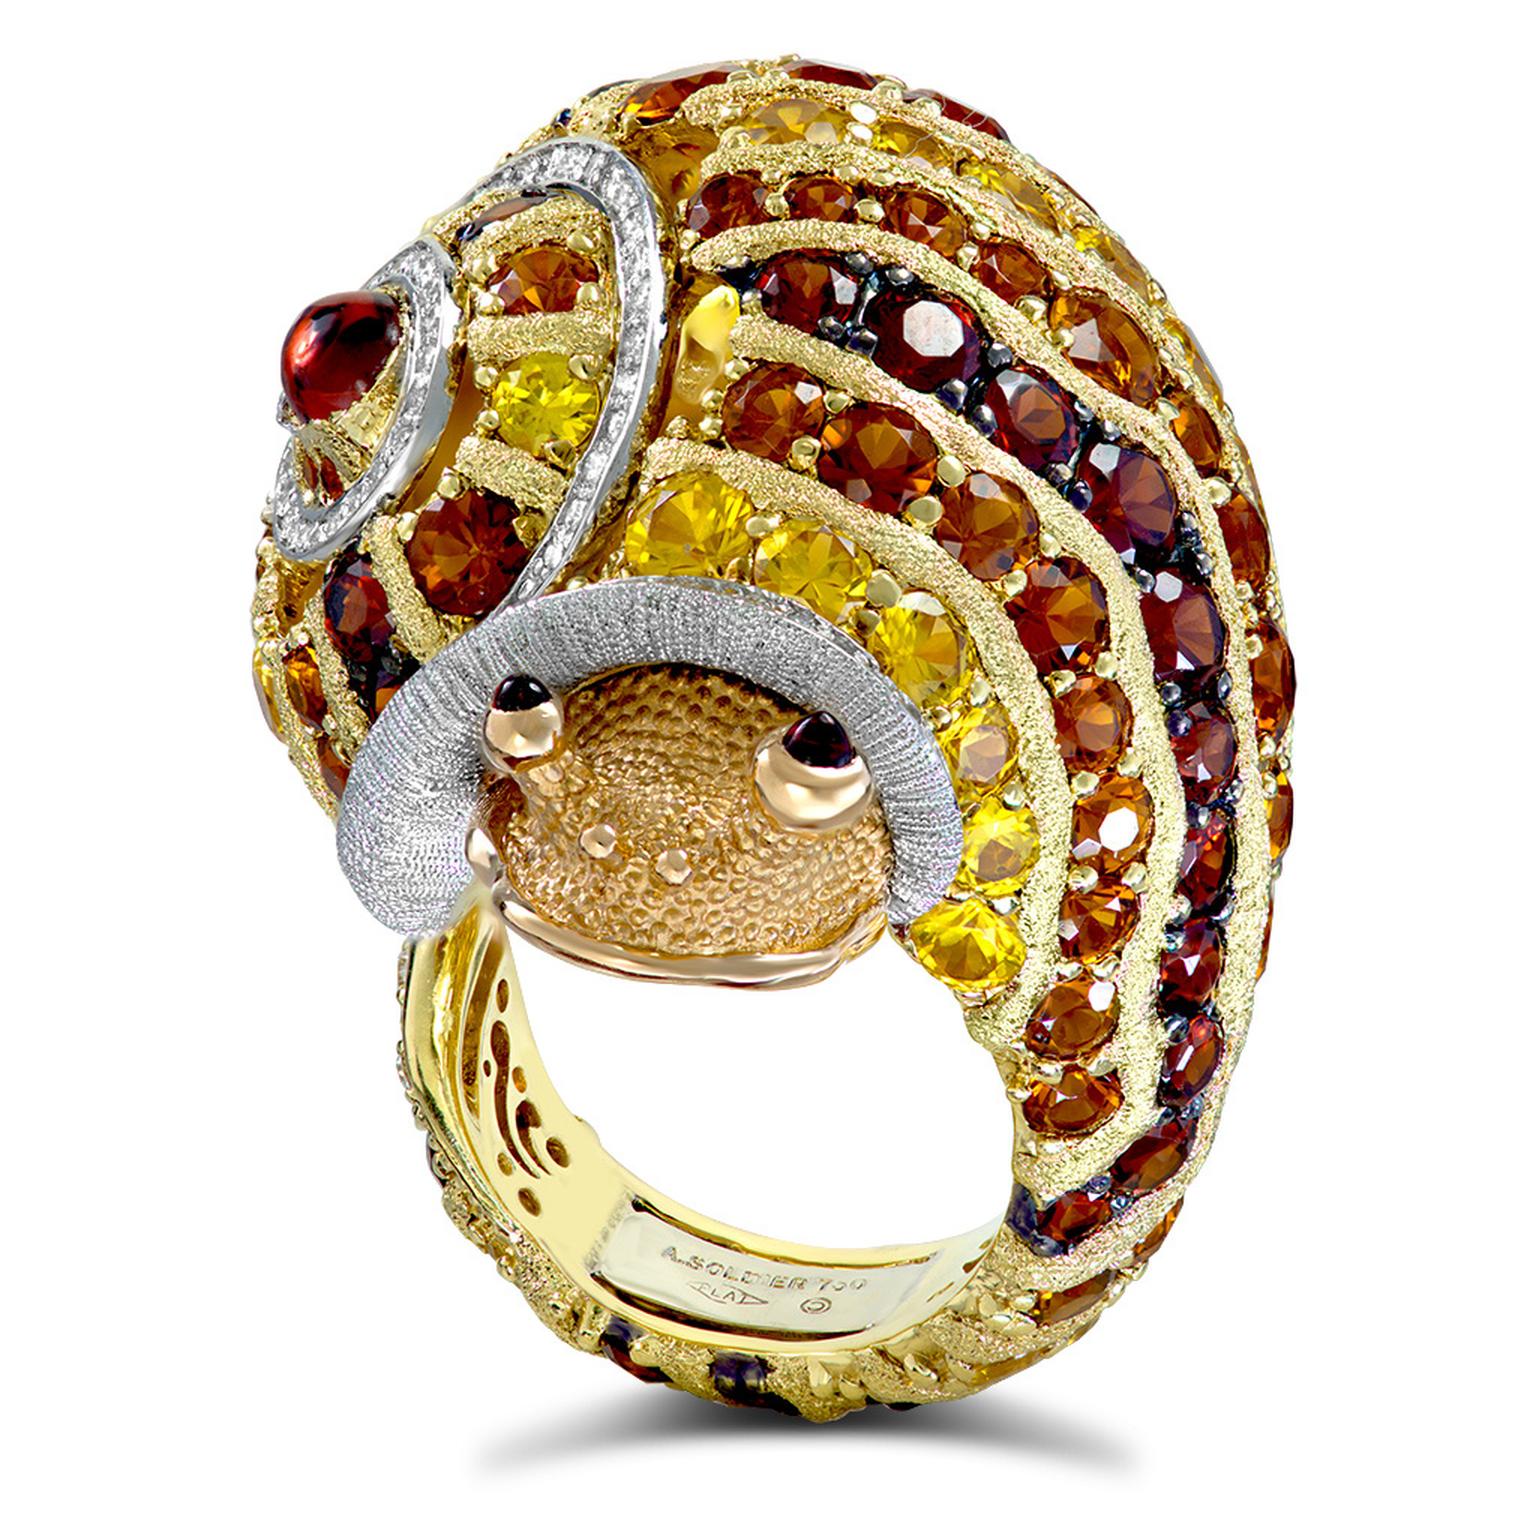 Sunny The Snail Ring